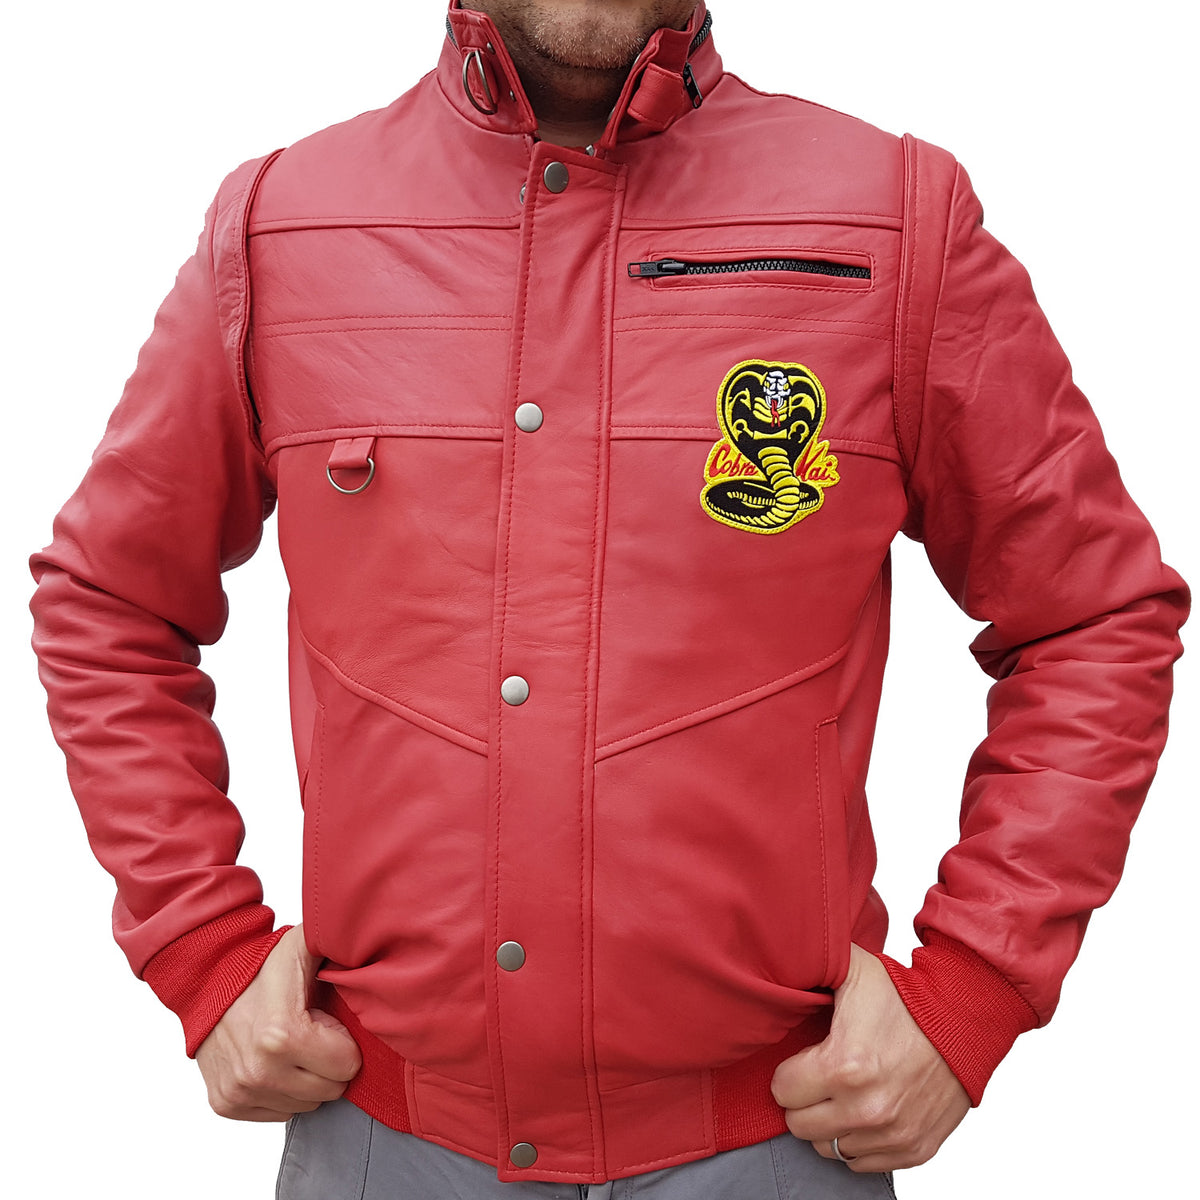 Cobra Kai OFFICIAL Johnny Lawrence Red Leather Jacket SPECIAL EDITION